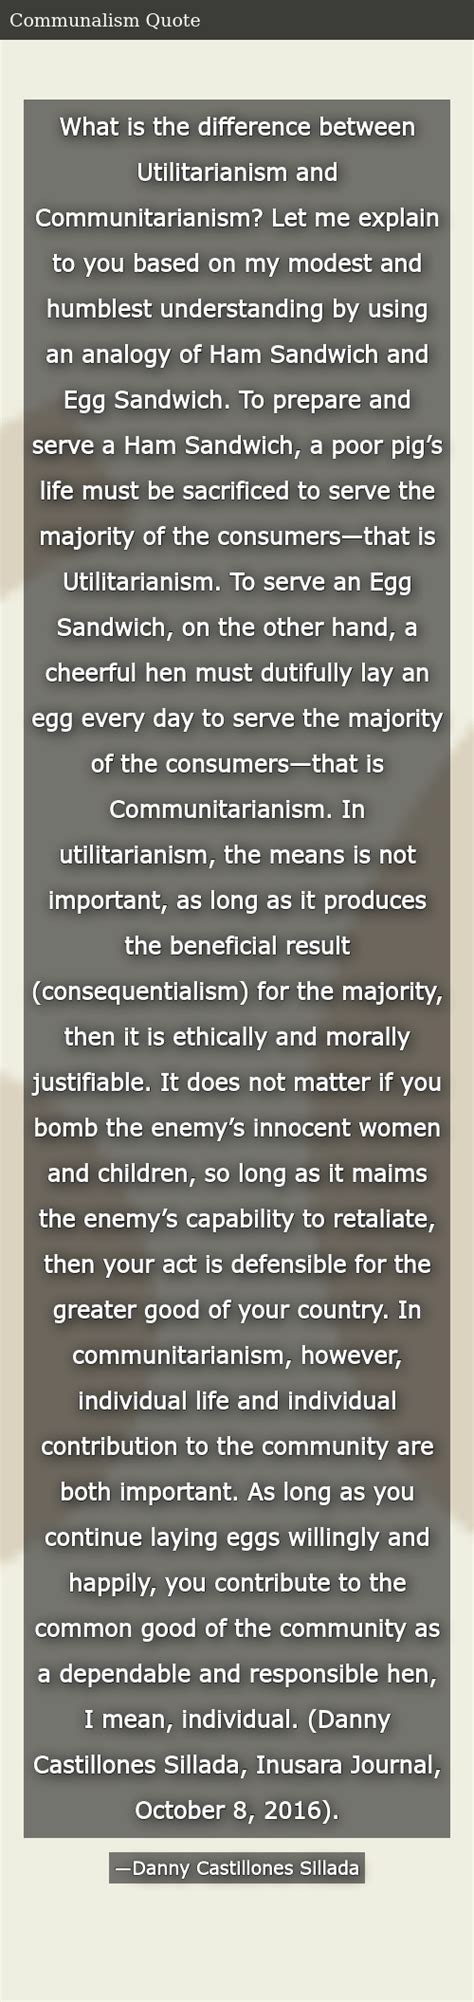 What Is The Difference Between Utilitarianism And Communitarianism Let Me Explain To You Based